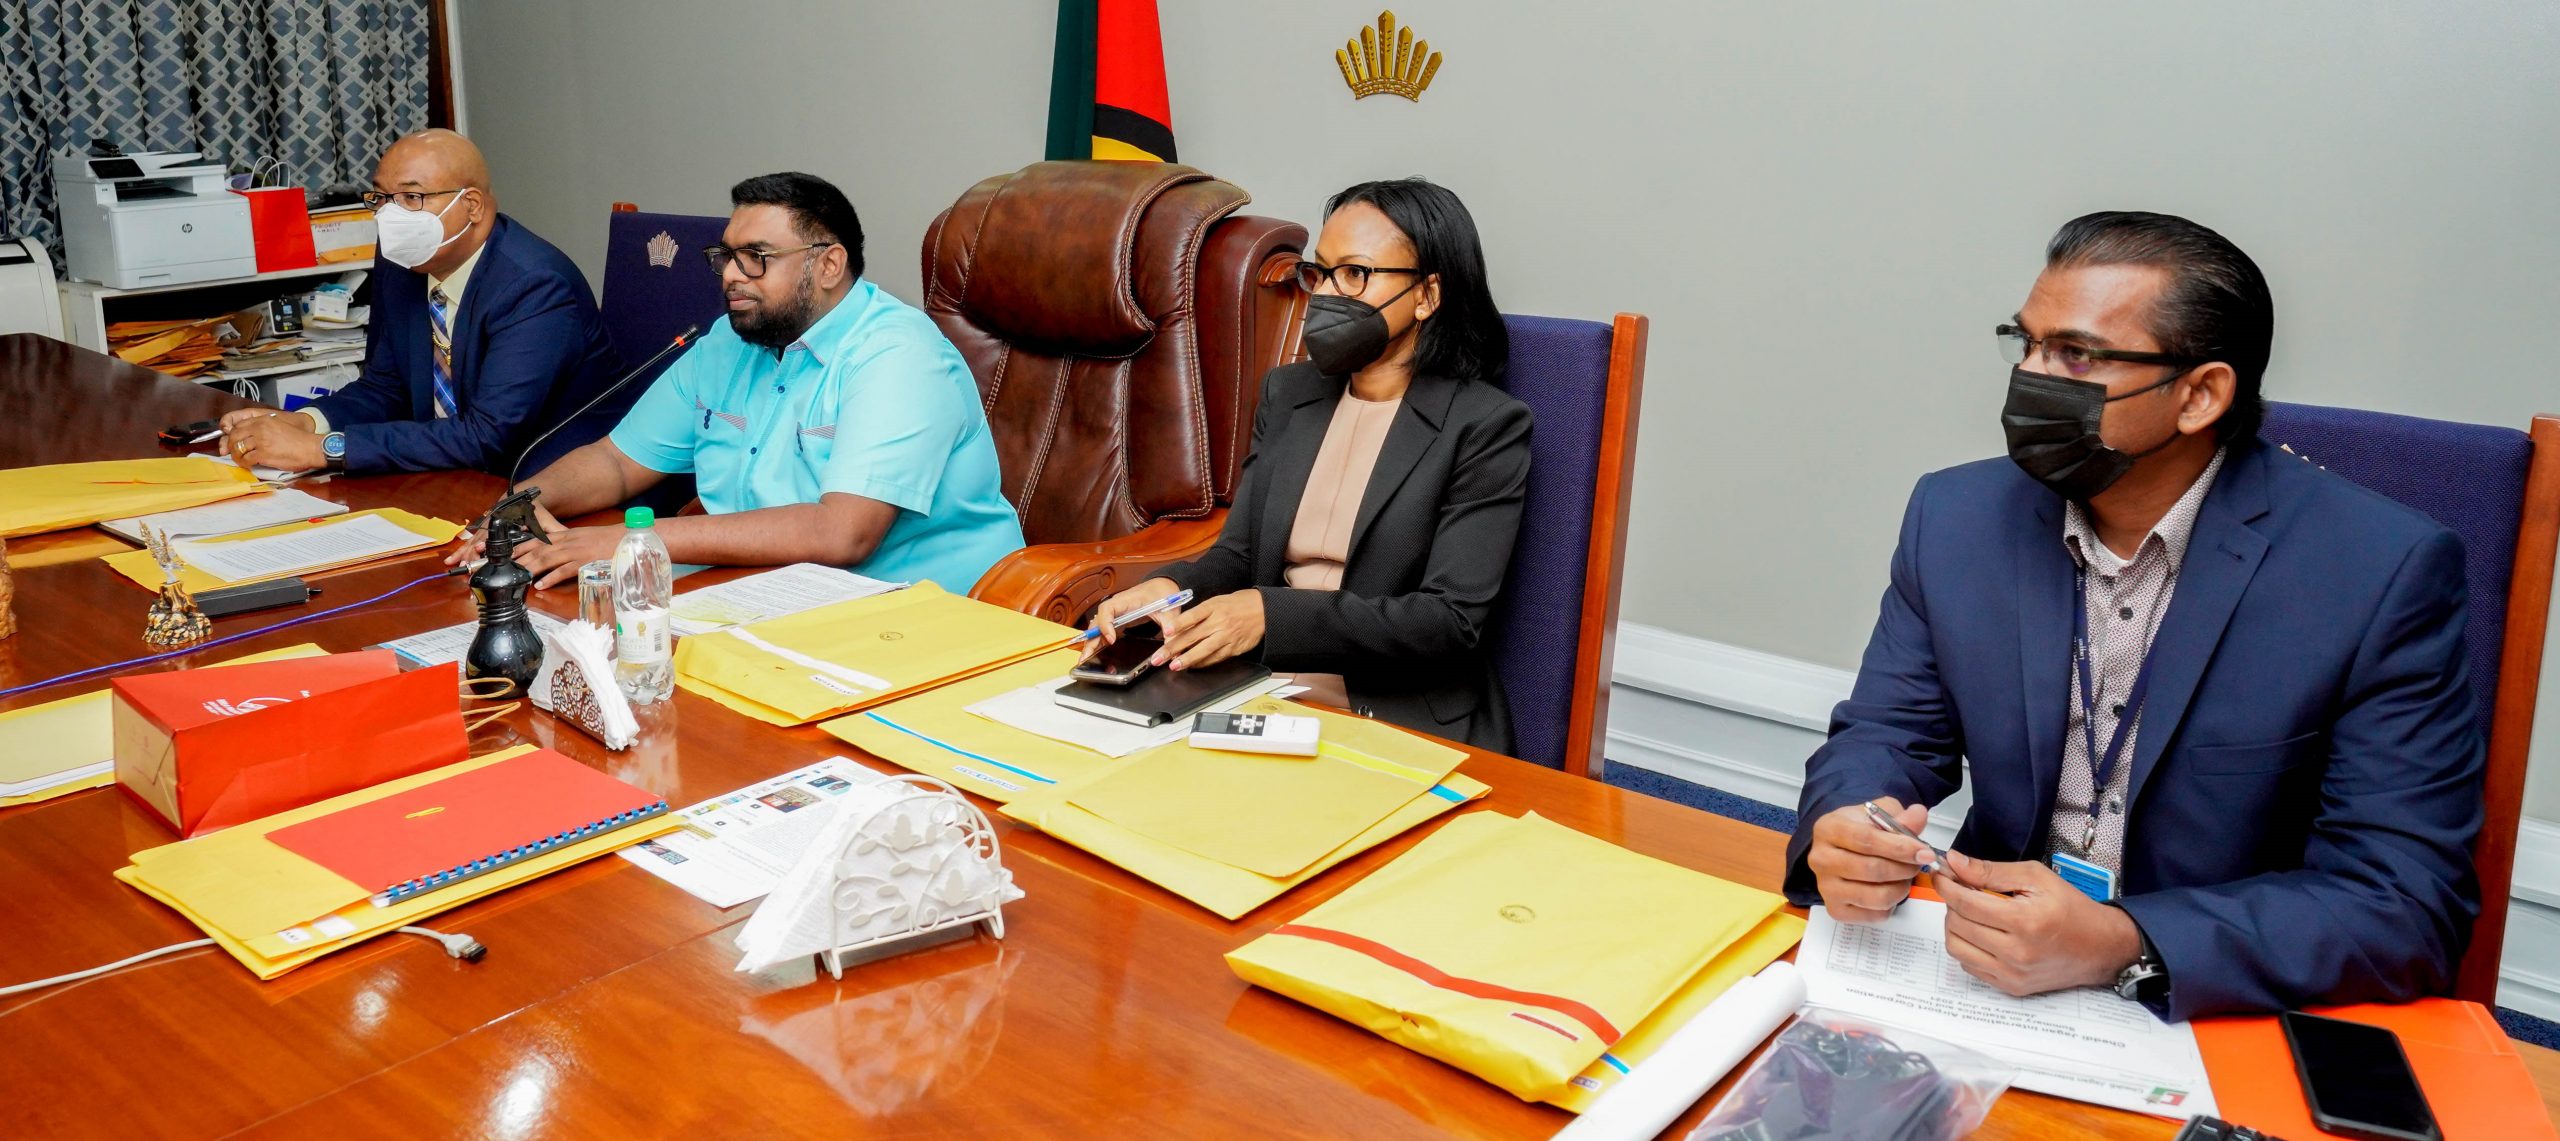 President, Dr. Irfaan Ali; Minister of Public Works, Juan Edghill (first from left); Minister of Tourism, Industry and Commerce, Oneidge Walrond and CEO of CJIA, Ramesh Ghir, engage executive members of Caribbean Airlines Limited during a virtual meeting, on Wednesday